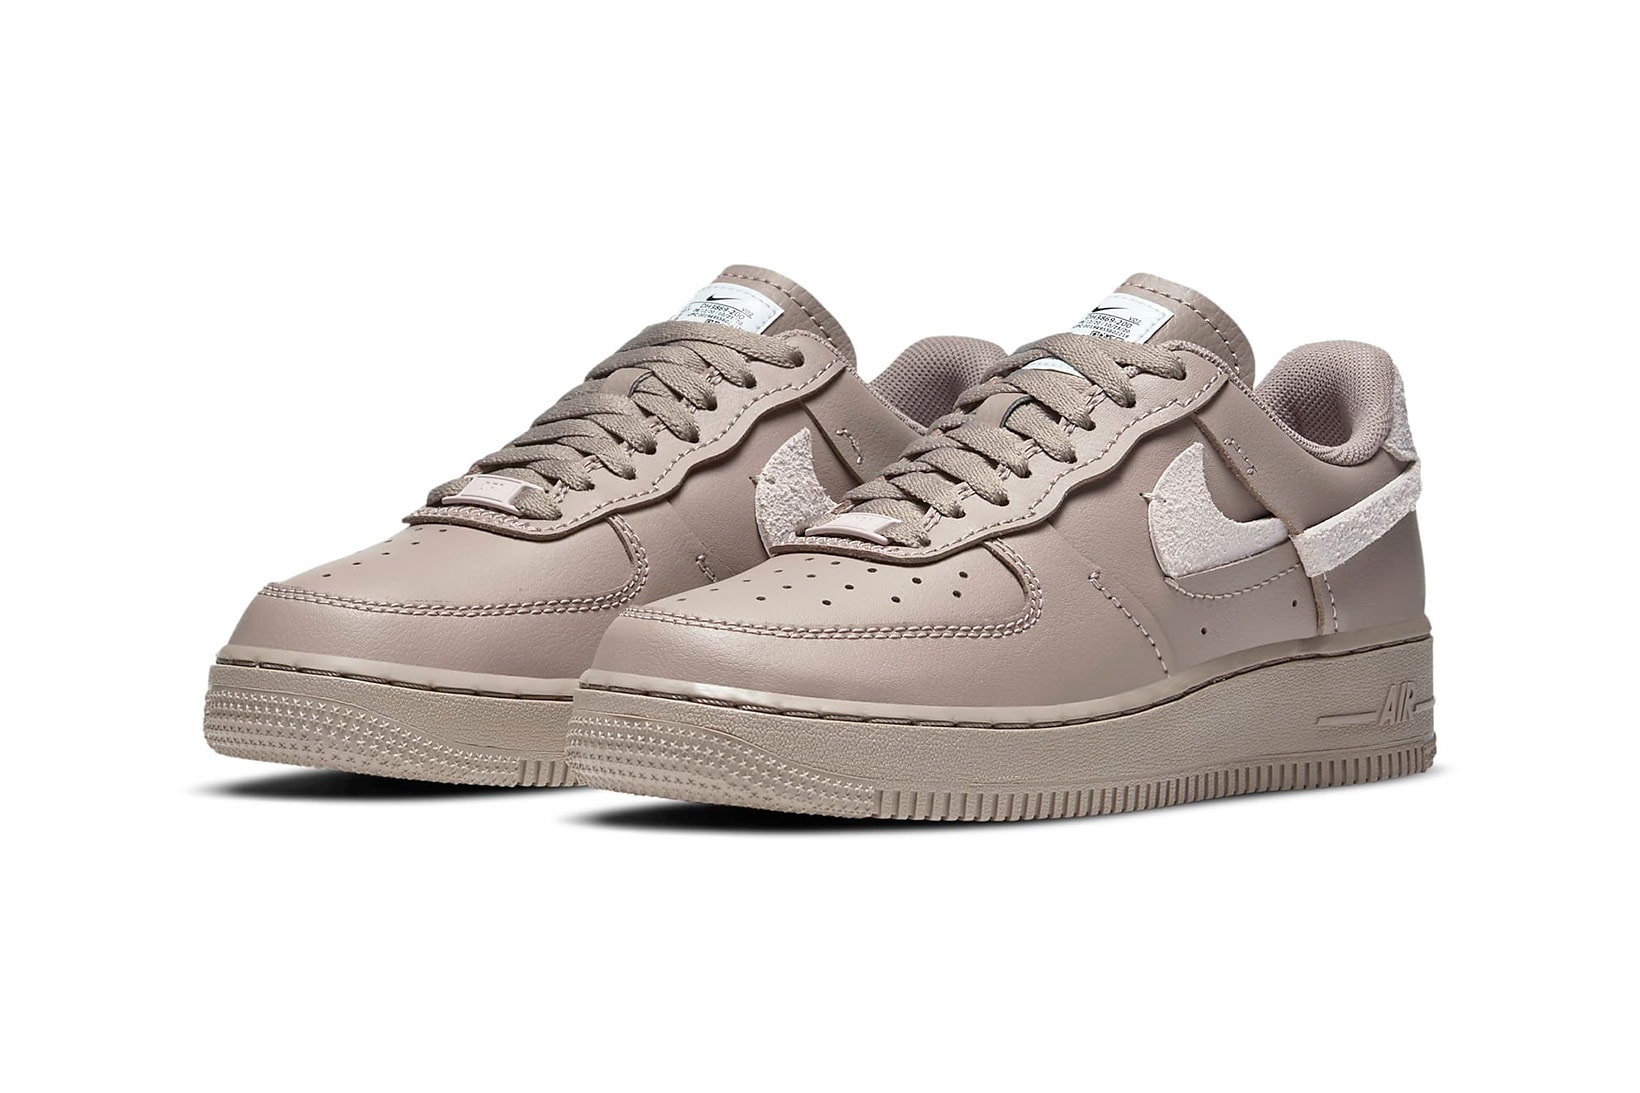 nike air force 1 af1 lxx womens sneakers malt platinum violet taupe colorway footwear shoes kicks lateral laces